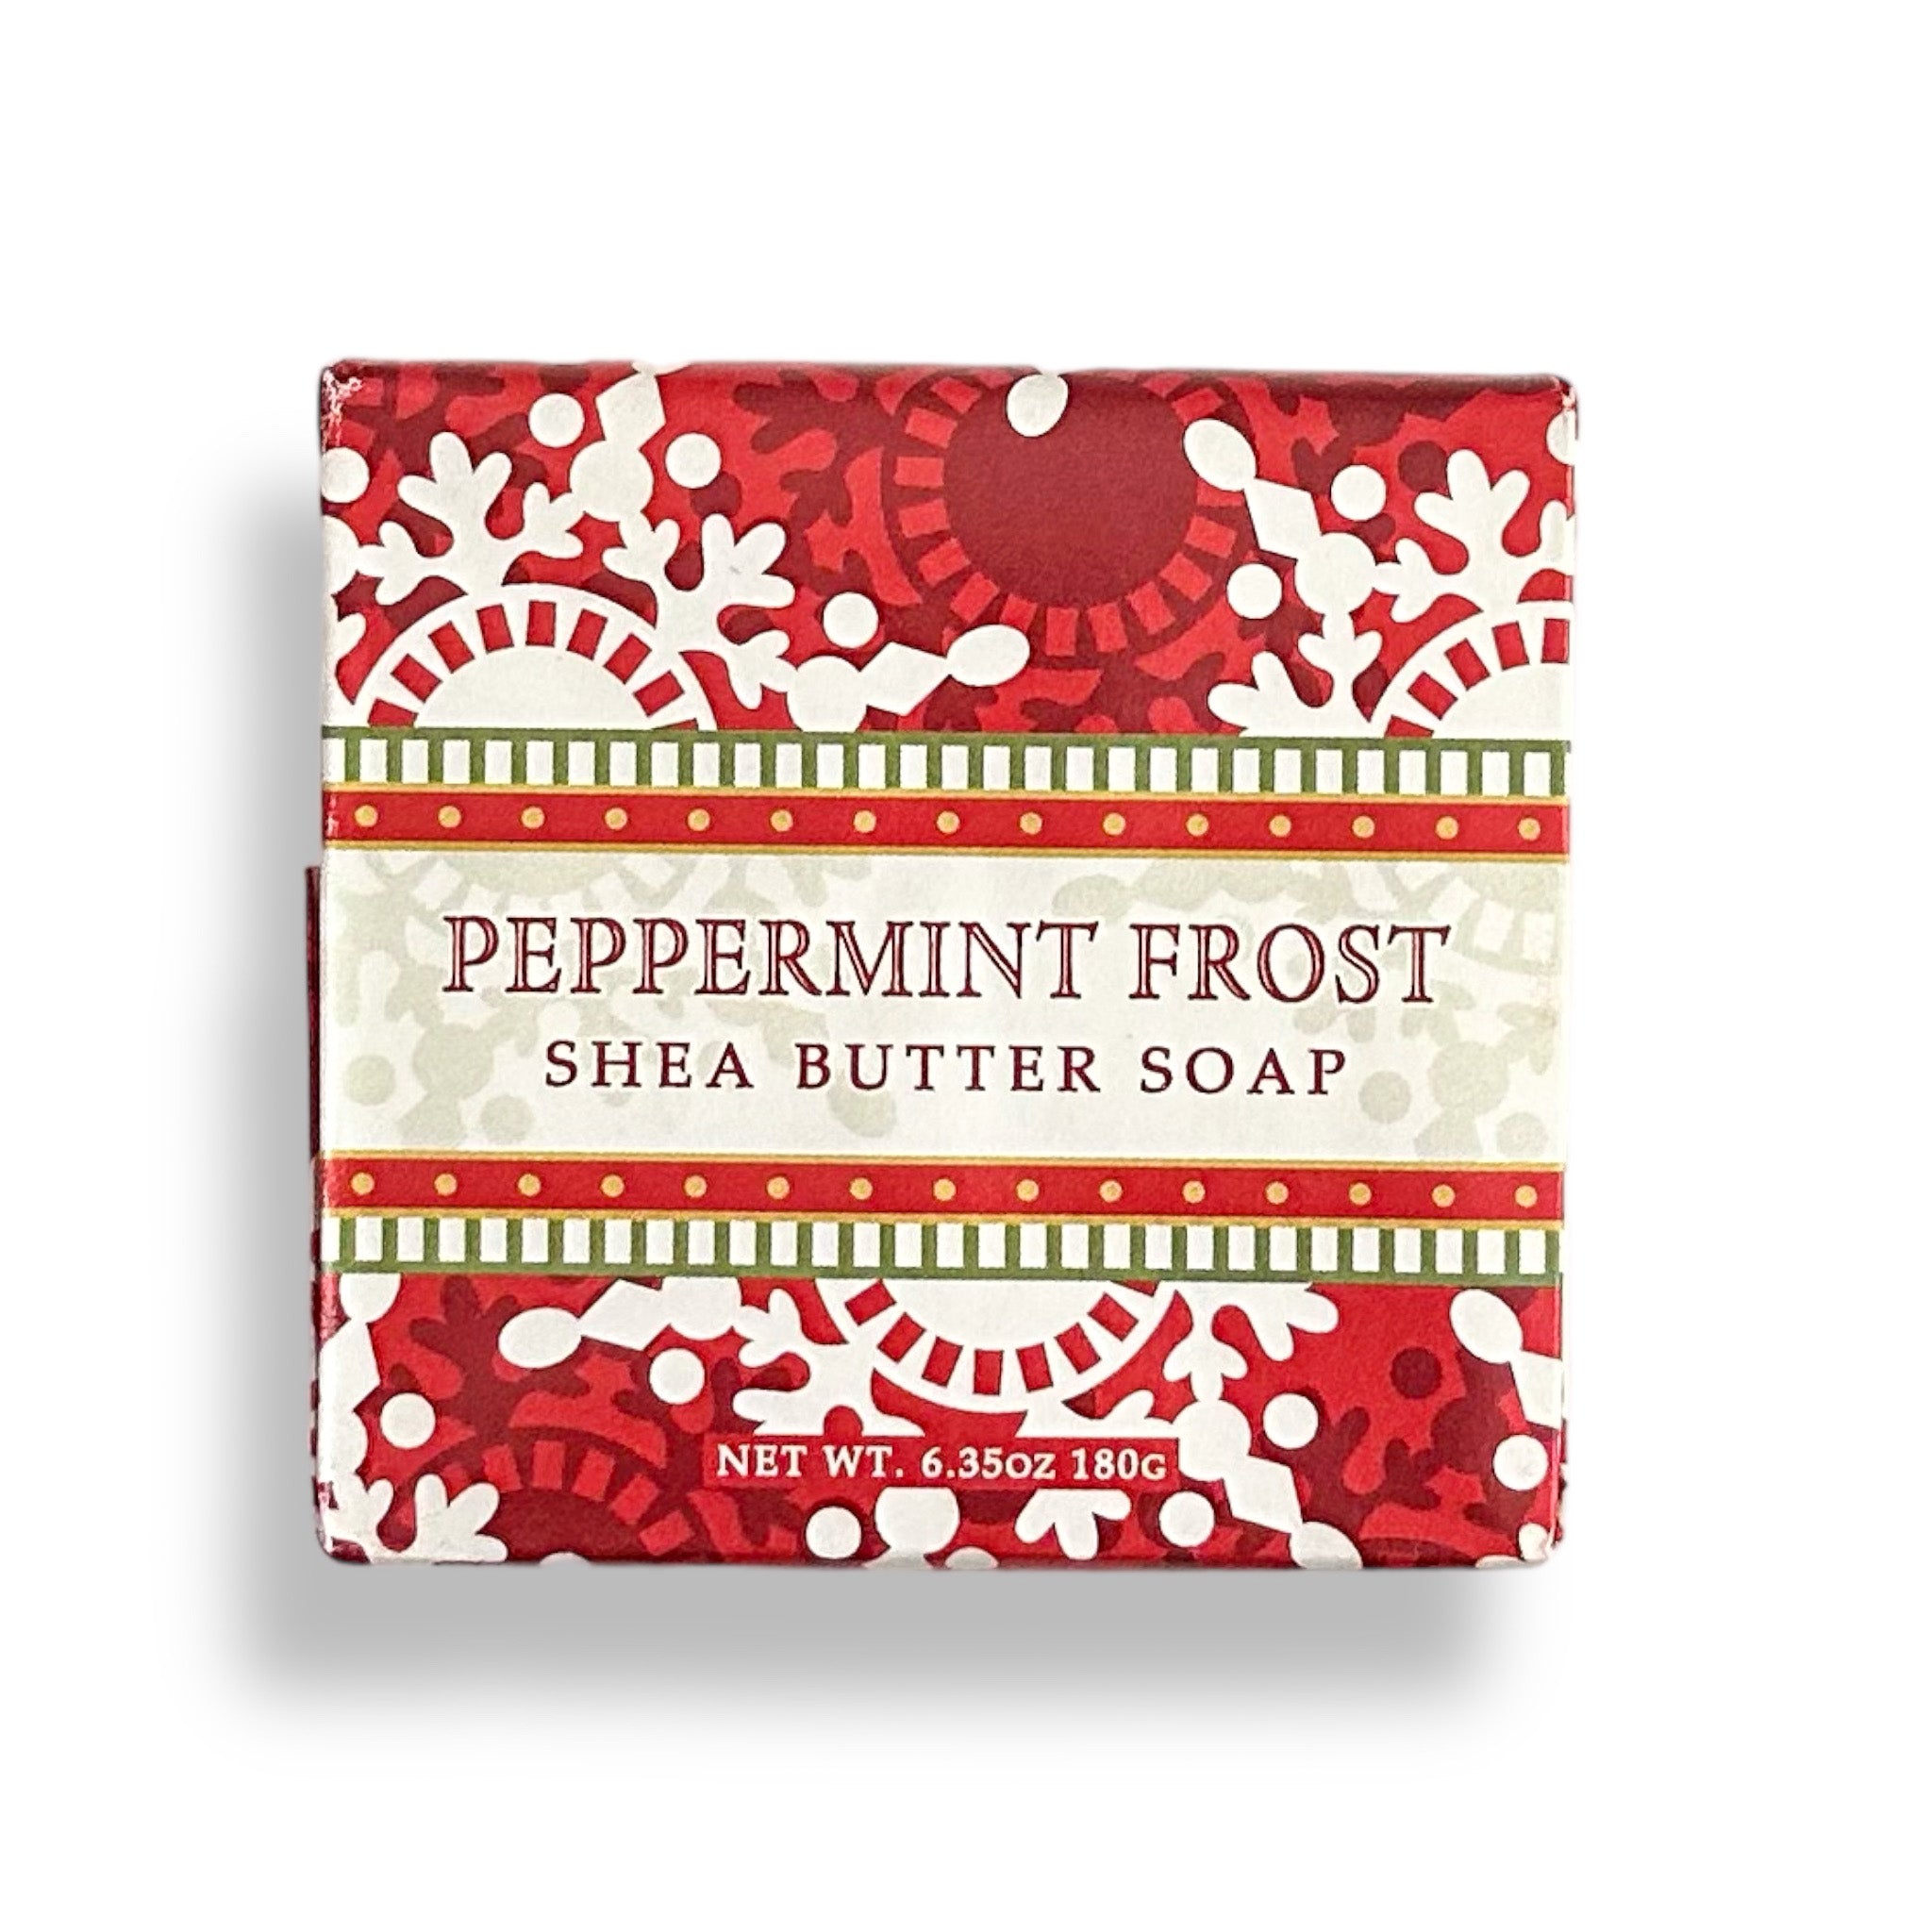 Greenwich Bay Trading Company Peppermint Frost Collection Soap 6.3 oz